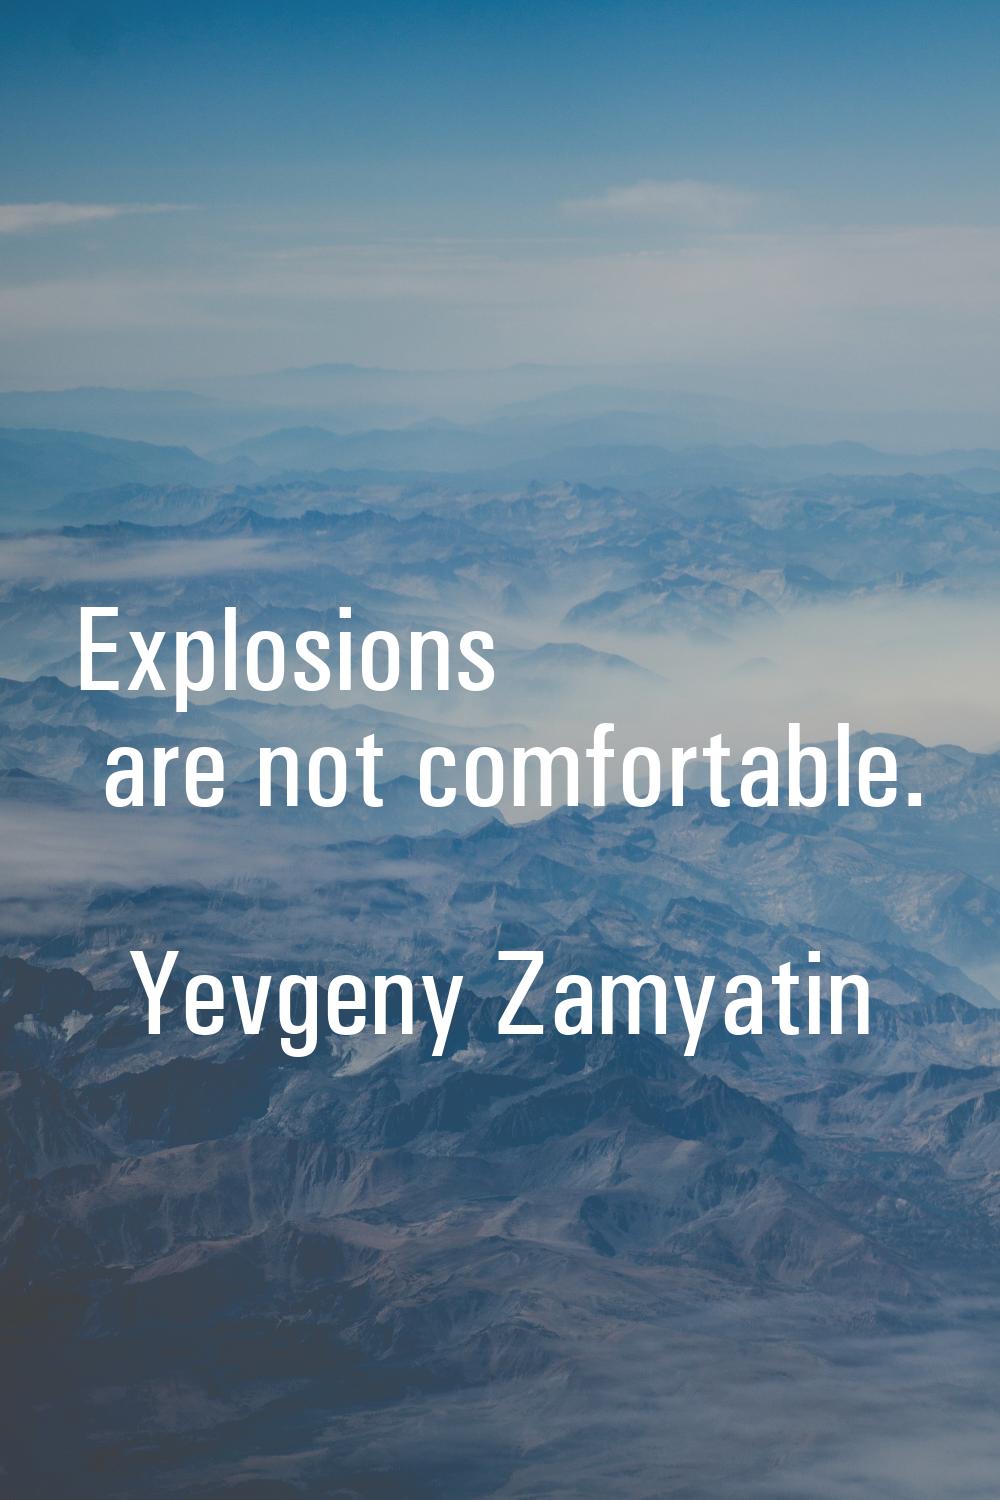 Explosions are not comfortable.